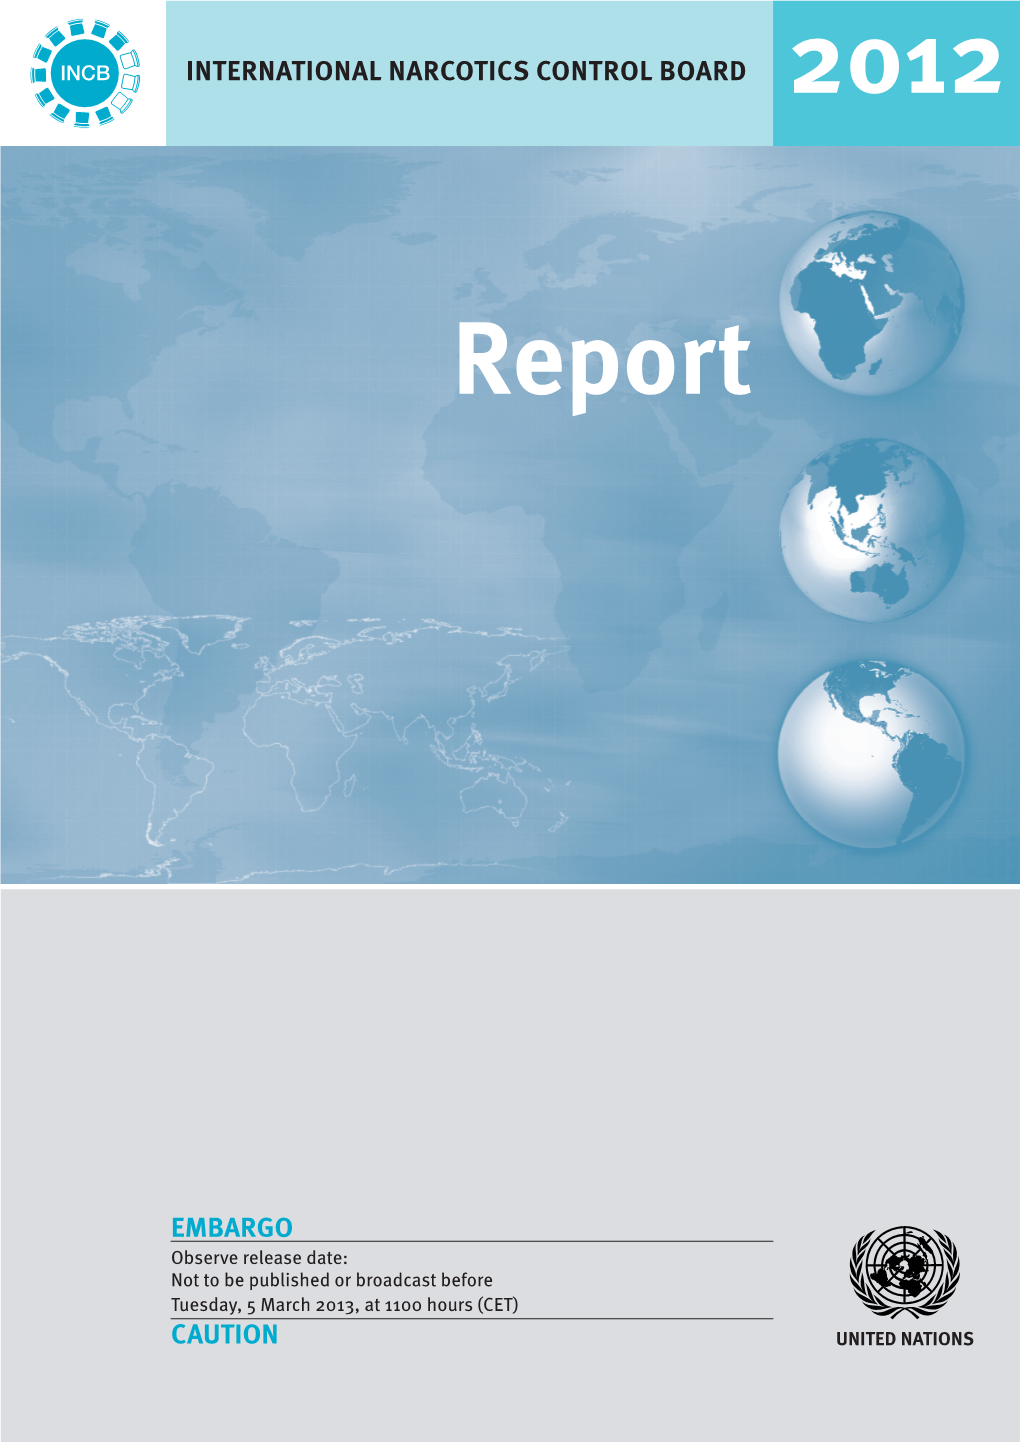 Report of the International Narcotics Control Board for 2012 (E/INCB/2012/1) Is Supplemented by the Following Reports